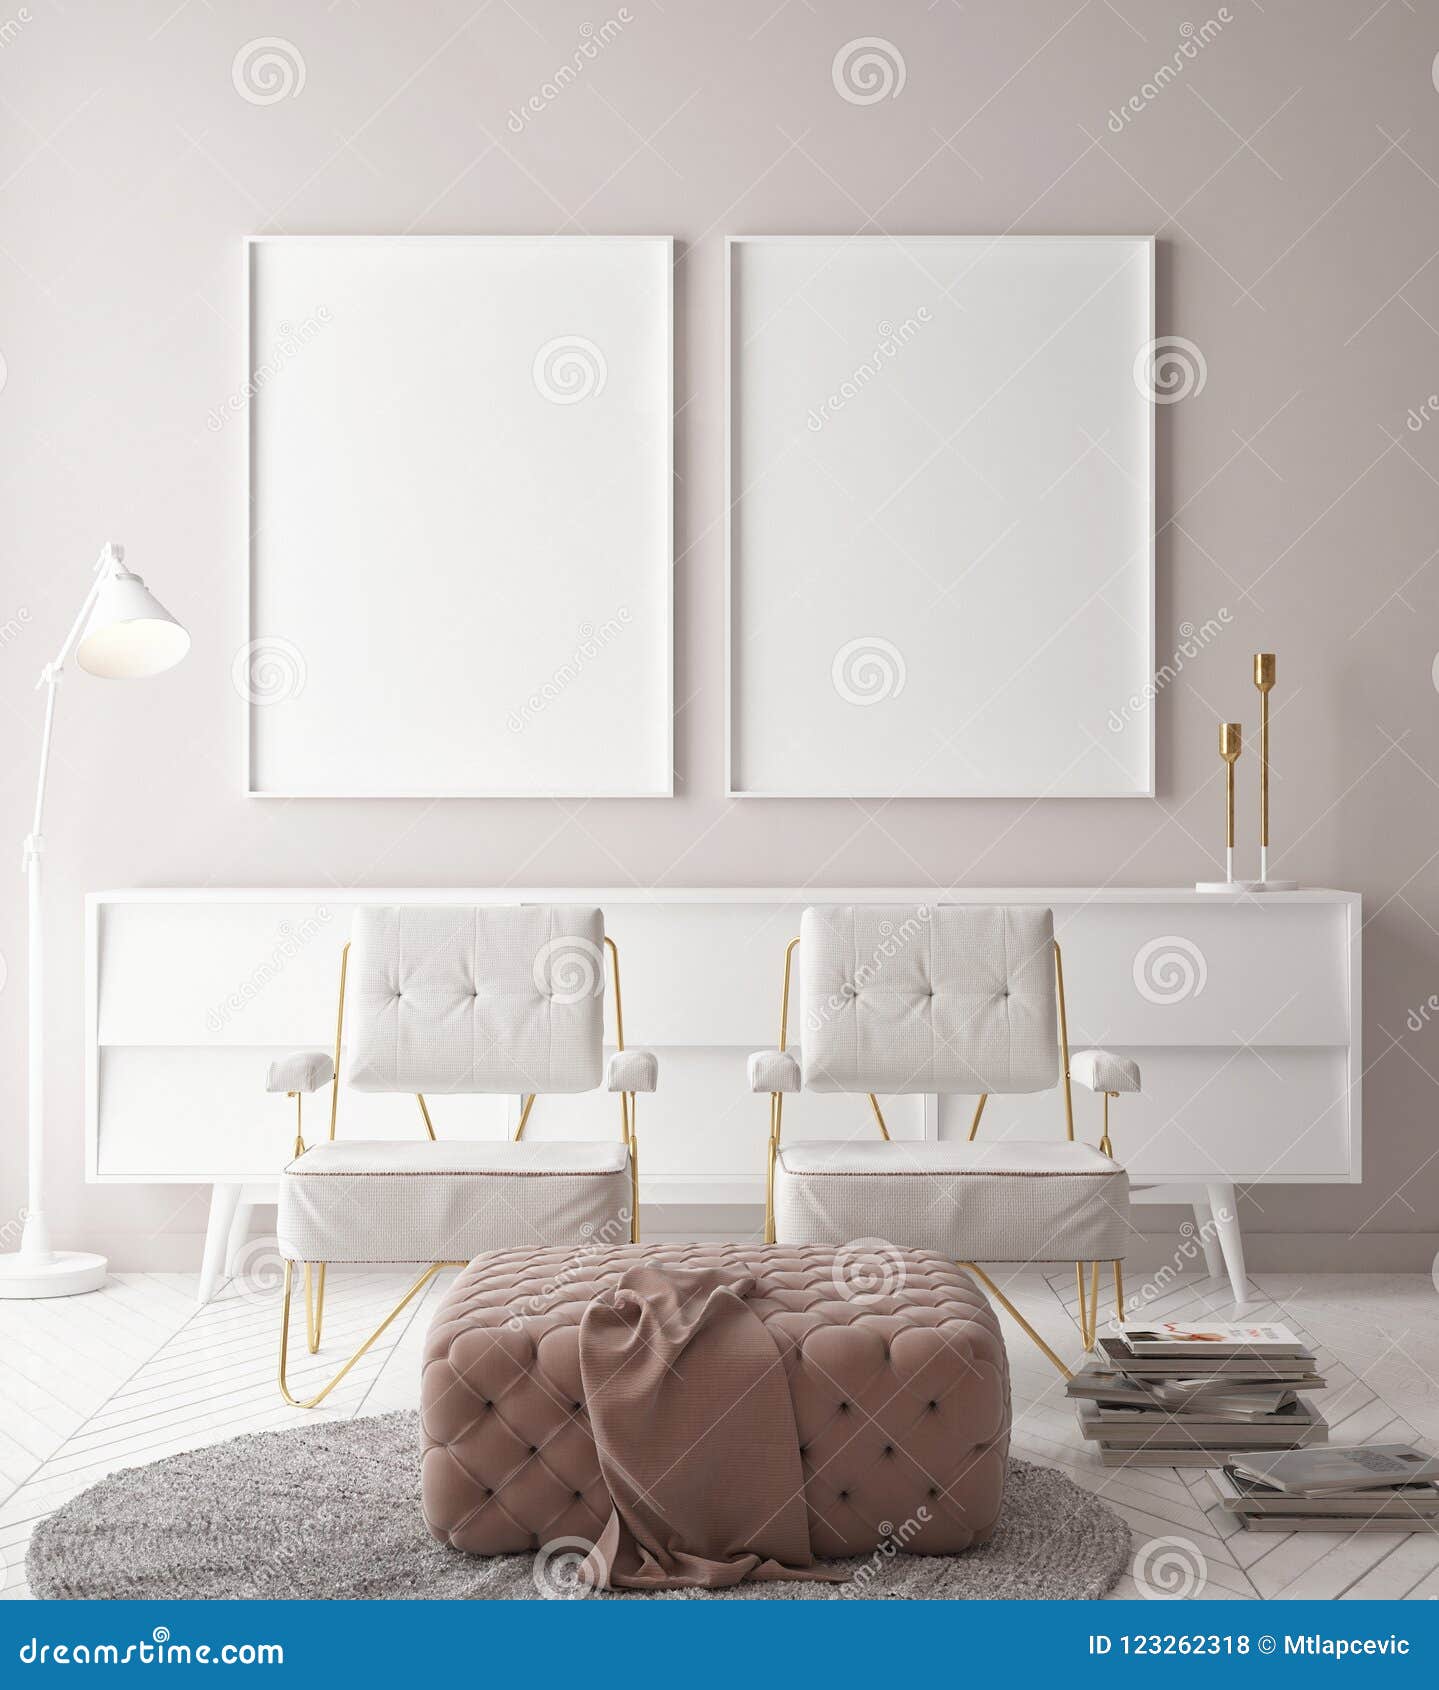 mock up posters, hipster background, minimalism wall with two chairs